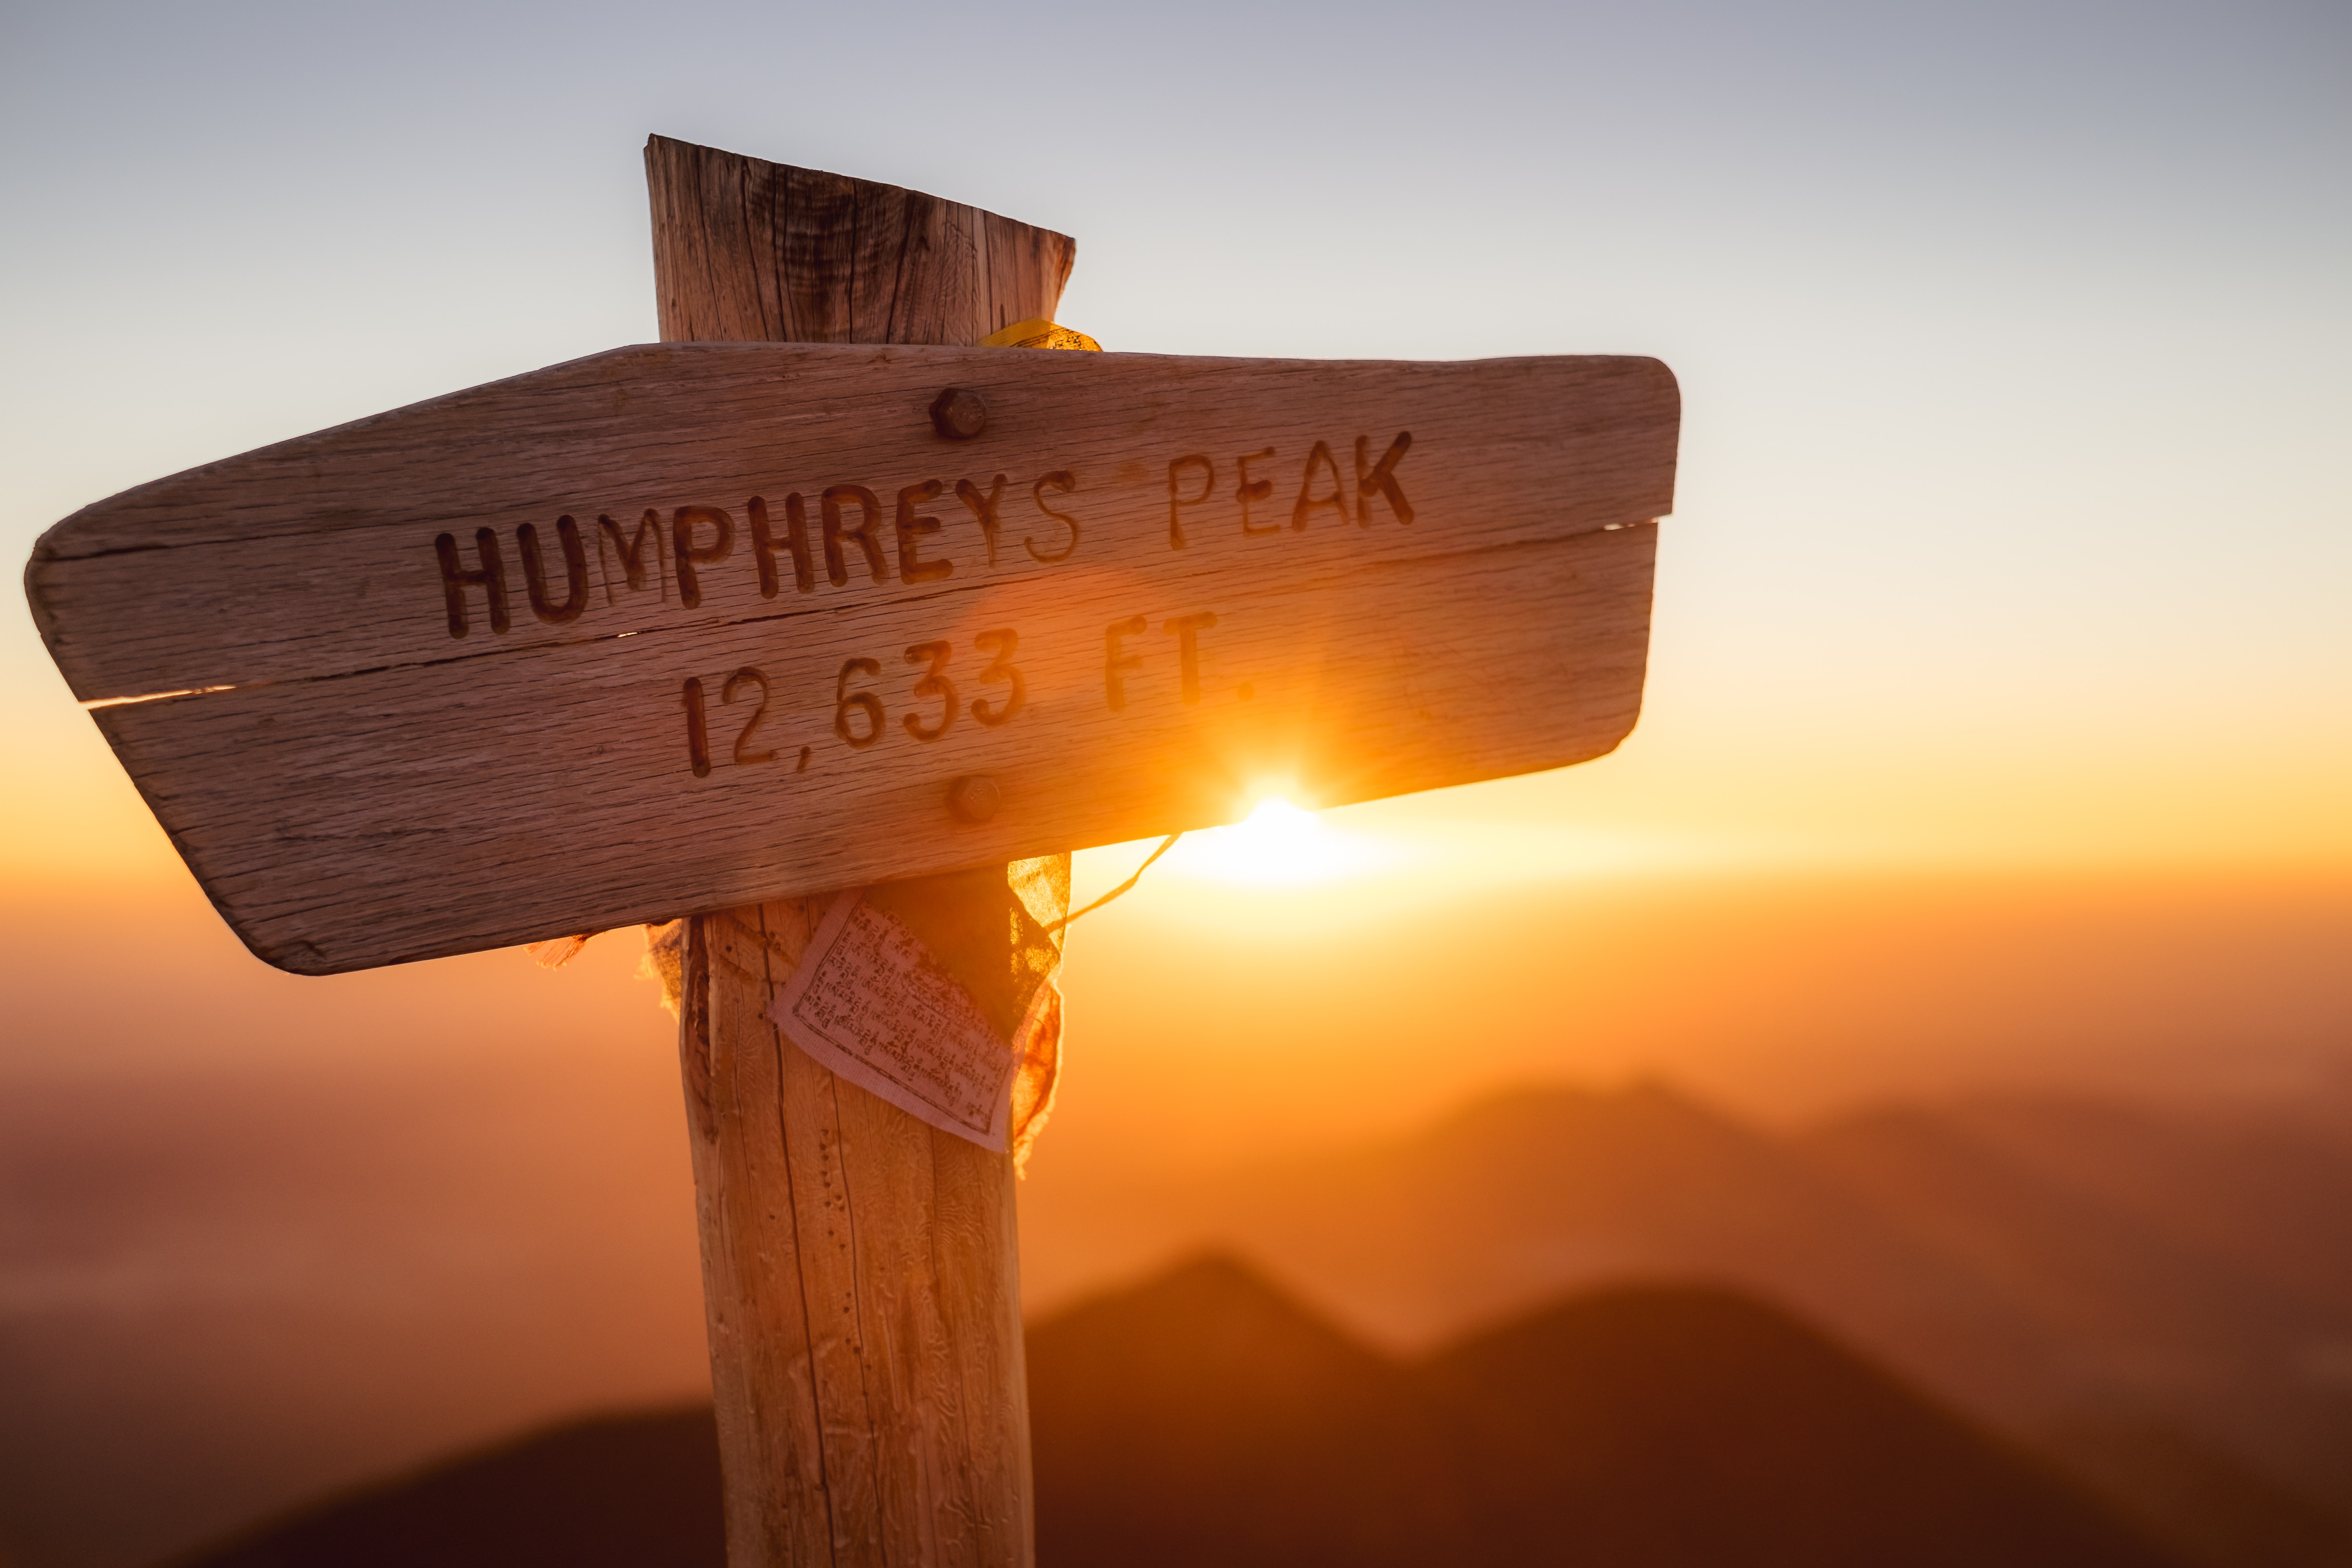 close-up photo of humphreys peak 12,633 feet wooden sign during golden hour